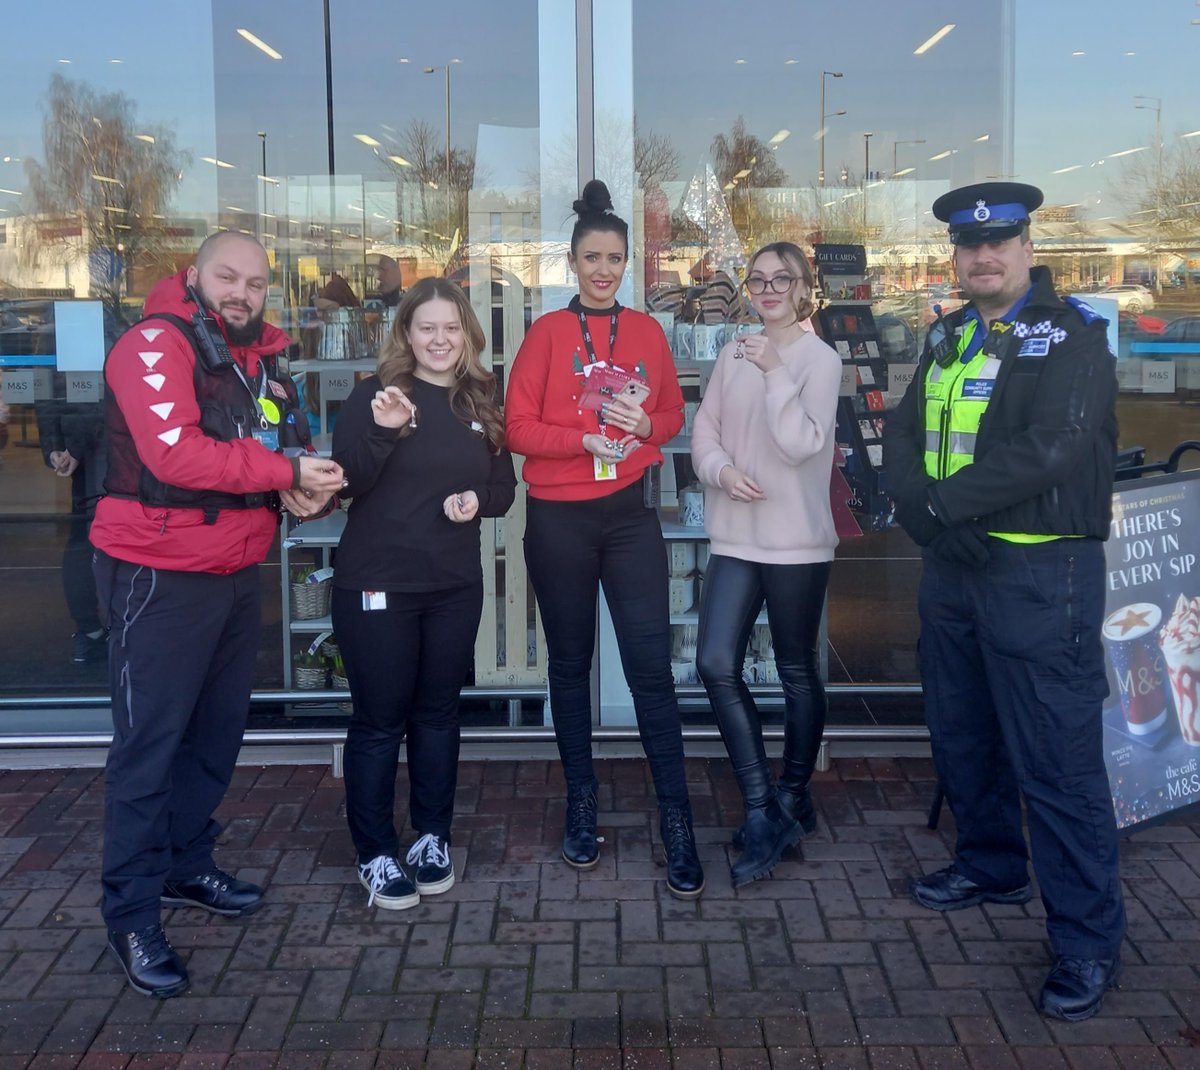 👮🏼‍♂️ PCSO Winter and Community Warden Hughes have been conducting a crime prevention patrol this morning as part of #OperationTinsel 🎄 

🎅 Your local team will be out and about all this week in the run-up to Christmas.  Please say hello if you see them... 👋